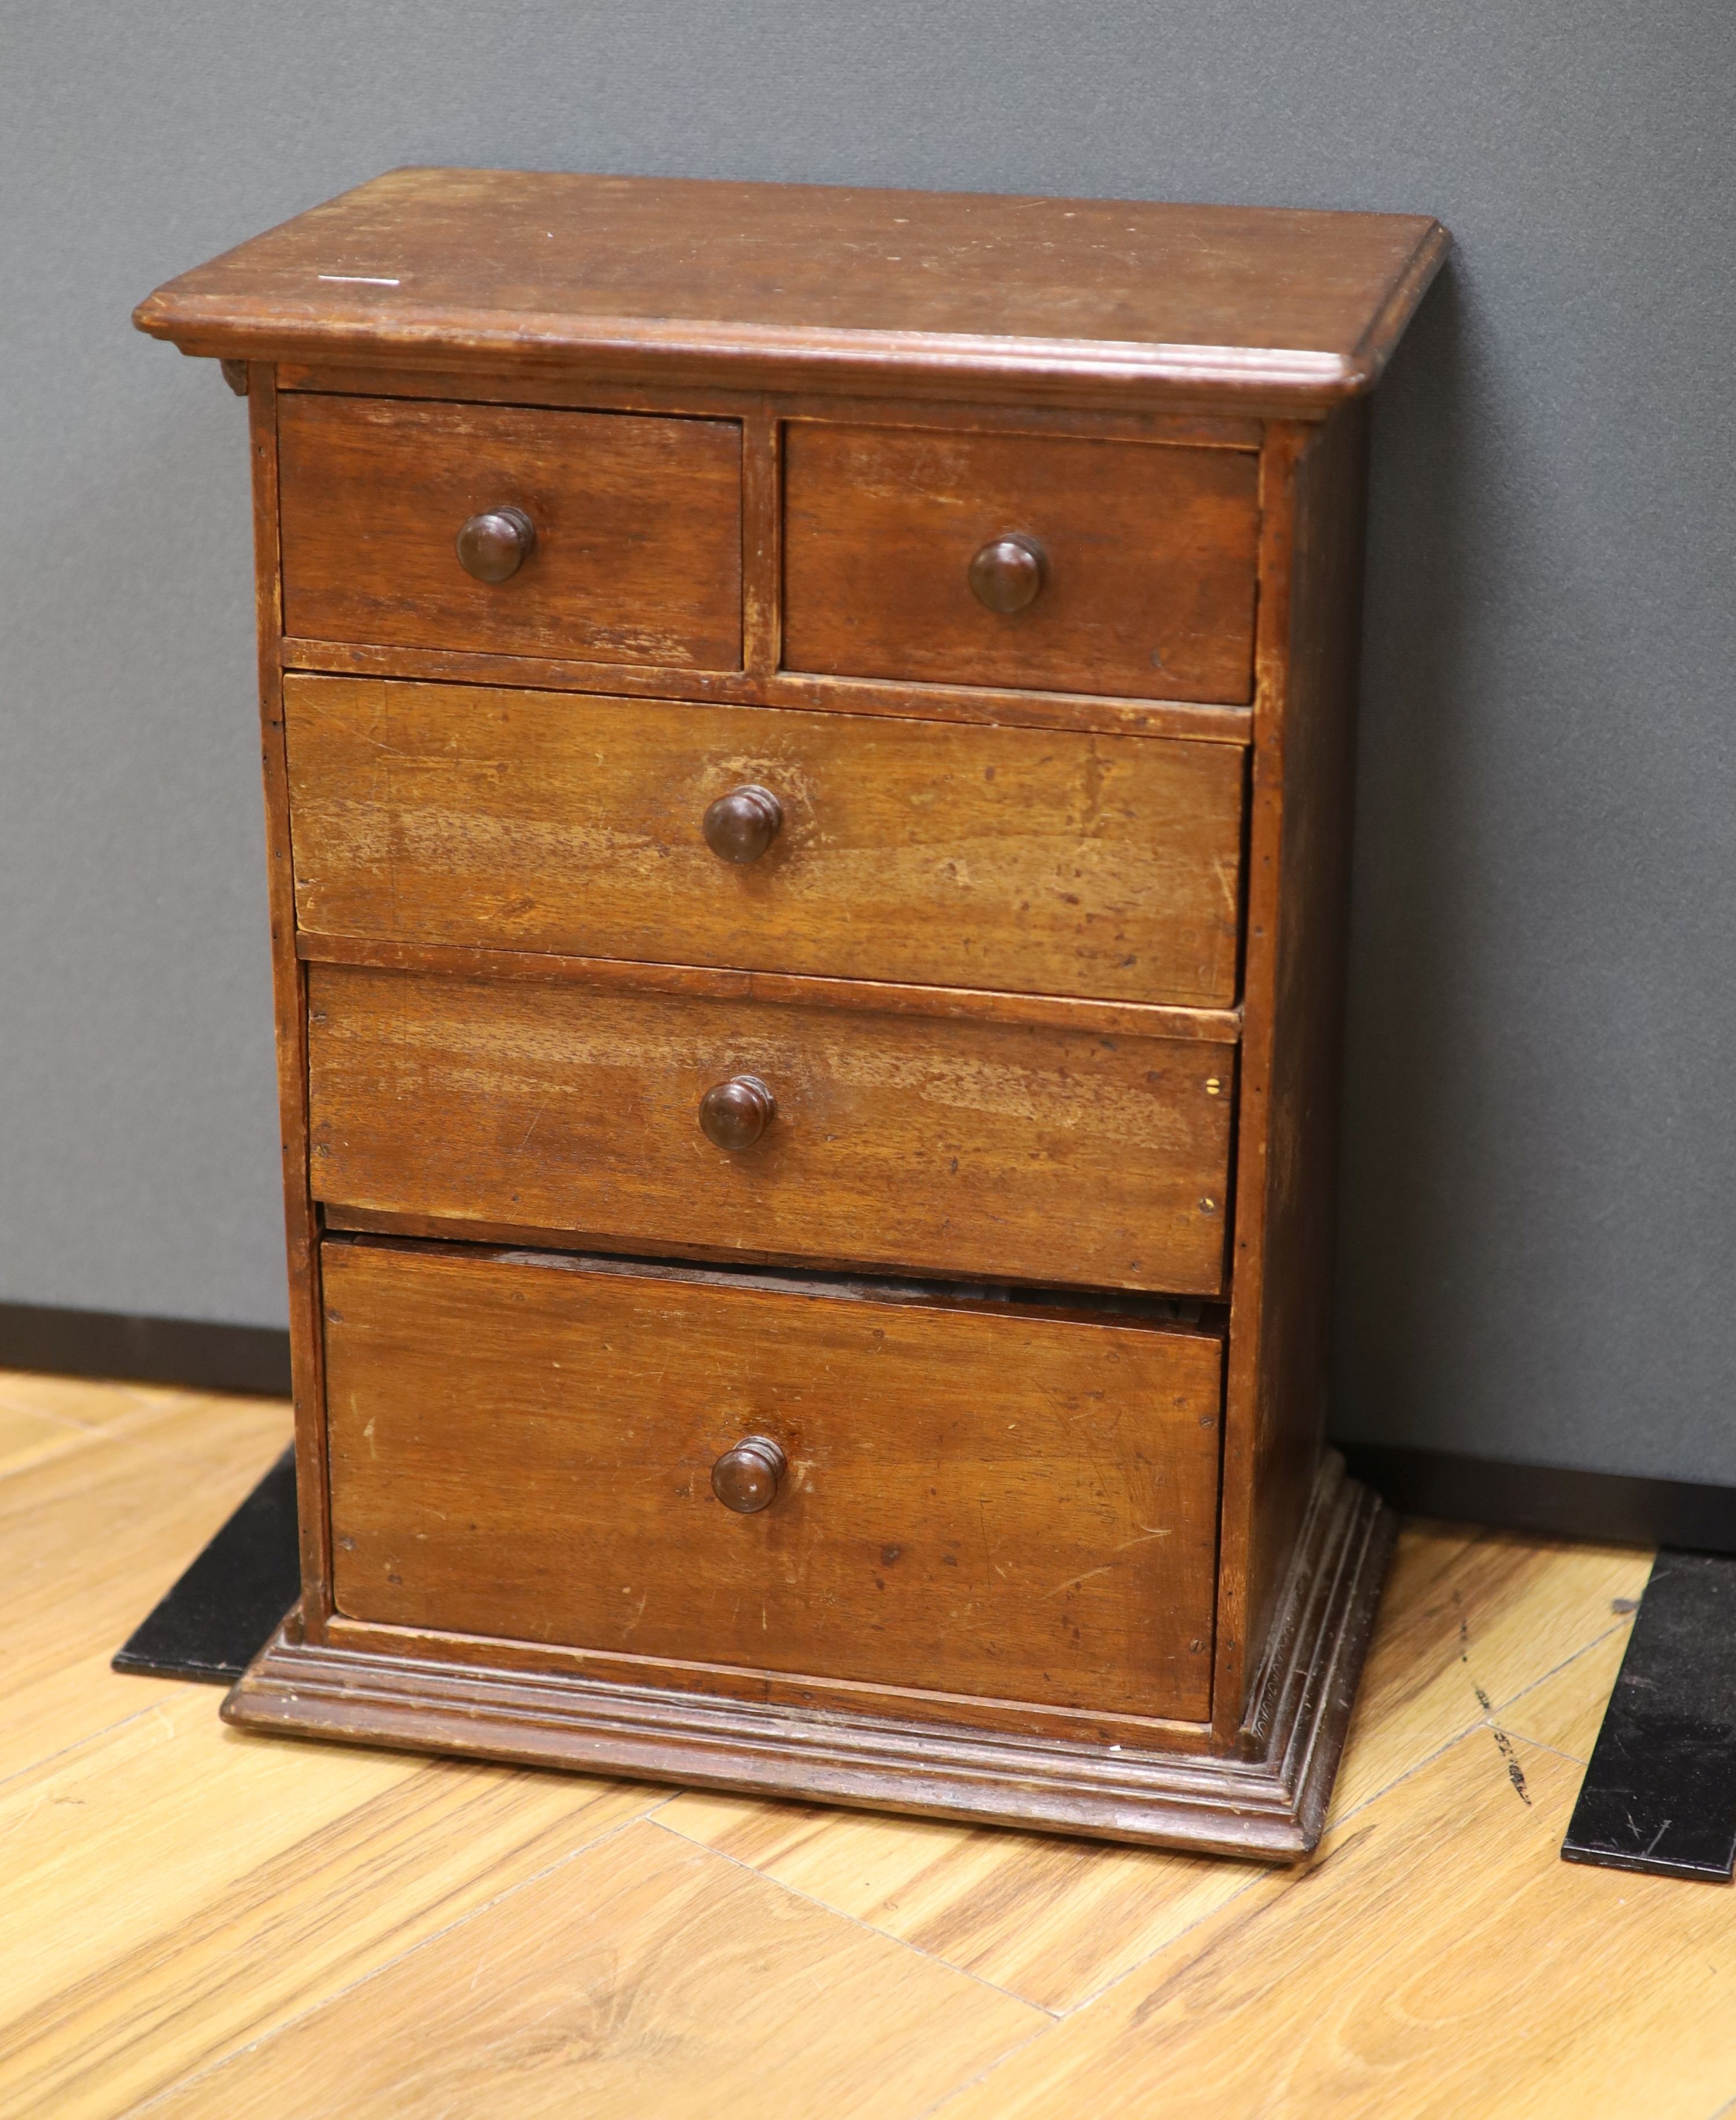 An early 20th century miniature chest and contents